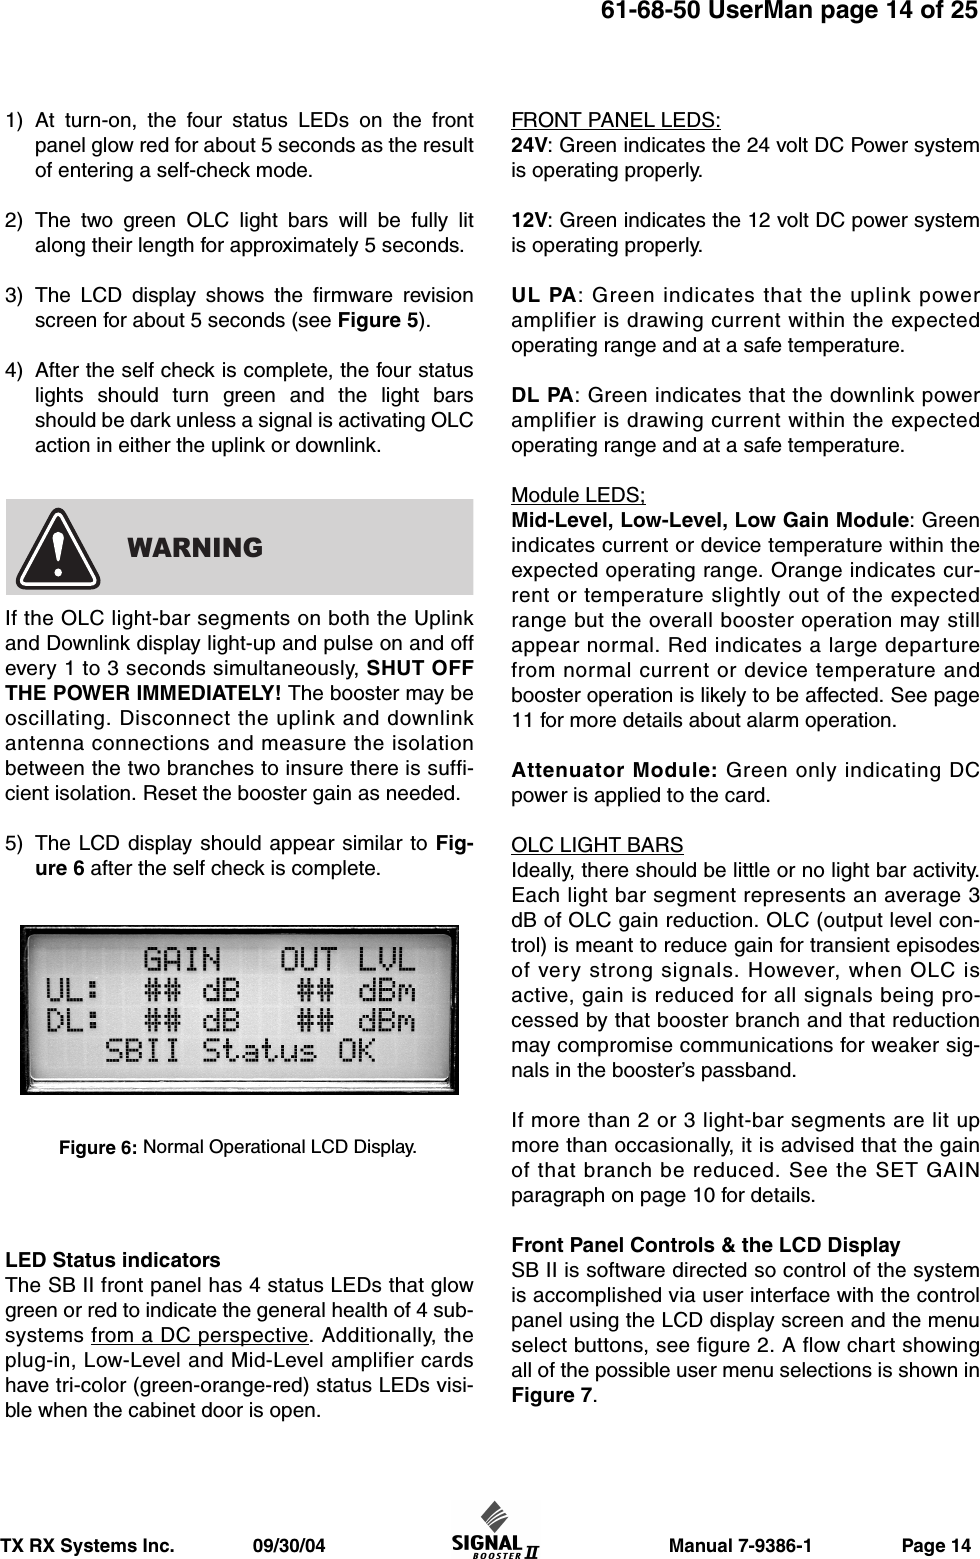                     Manual 7-9386-1                 Page 14TX RX Systems Inc.               09/30/0461-68-50 UserMan page 14 of 251) At turn-on, the four status LEDs on the frontpanel glow red for about 5 seconds as the resultof entering a self-check mode.2) The two green OLC light bars will be fully litalong their length for approximately 5 seconds.3) The LCD display shows the firmware revisionscreen for about 5 seconds (see Figure 5).4) After the self check is complete, the four statuslights should turn green and the light barsshould be dark unless a signal is activating OLCaction in either the uplink or downlink.If the OLC light-bar segments on both the Uplinkand Downlink display light-up and pulse on and offevery 1 to 3 seconds simultaneously, SHUT OFFTHE POWER IMMEDIATELY! The booster may beoscillating. Disconnect the uplink and downlinkantenna connections and measure the isolationbetween the two branches to insure there is suffi-cient isolation. Reset the booster gain as needed.5) The LCD display should appear similar to Fig-ure 6 after the self check is complete.LED Status indicatorsThe SB II front panel has 4 status LEDs that glowgreen or red to indicate the general health of 4 sub-systems from a DC perspective. Additionally, theplug-in, Low-Level and Mid-Level amplifier cardshave tri-color (green-orange-red) status LEDs visi-ble when the cabinet door is open.FRONT PANEL LEDS:24V: Green indicates the 24 volt DC Power systemis operating properly.12V: Green indicates the 12 volt DC power systemis operating properly.UL PA: Green indicates that the uplink poweramplifier is drawing current within the expectedoperating range and at a safe temperature.DL PA: Green indicates that the downlink poweramplifier is drawing current within the expectedoperating range and at a safe temperature.Module LEDS;Mid-Level, Low-Level, Low Gain Module: Greenindicates current or device temperature within theexpected operating range. Orange indicates cur-rent or temperature slightly out of the expectedrange but the overall booster operation may stillappear normal. Red indicates a large departurefrom normal current or device temperature andbooster operation is likely to be affected. See page11 for more details about alarm operation.Attenuator Module: Green only indicating DCpower is applied to the card.OLC LIGHT BARSIdeally, there should be little or no light bar activity.Each light bar segment represents an average 3dB of OLC gain reduction. OLC (output level con-trol) is meant to reduce gain for transient episodesof very strong signals. However, when OLC isactive, gain is reduced for all signals being pro-cessed by that booster branch and that reductionmay compromise communications for weaker sig-nals in the booster’s passband.If more than 2 or 3 light-bar segments are lit upmore than occasionally, it is advised that the gainof that branch be reduced. See the SET GAINparagraph on page 10 for details.Front Panel Controls &amp; the LCD DisplaySB II is software directed so control of the systemis accomplished via user interface with the controlpanel using the LCD display screen and the menuselect buttons, see figure 2. A flow chart showingall of the possible user menu selections is shown inFigure 7.WARNINGFigure 6: Normal Operational LCD Display.